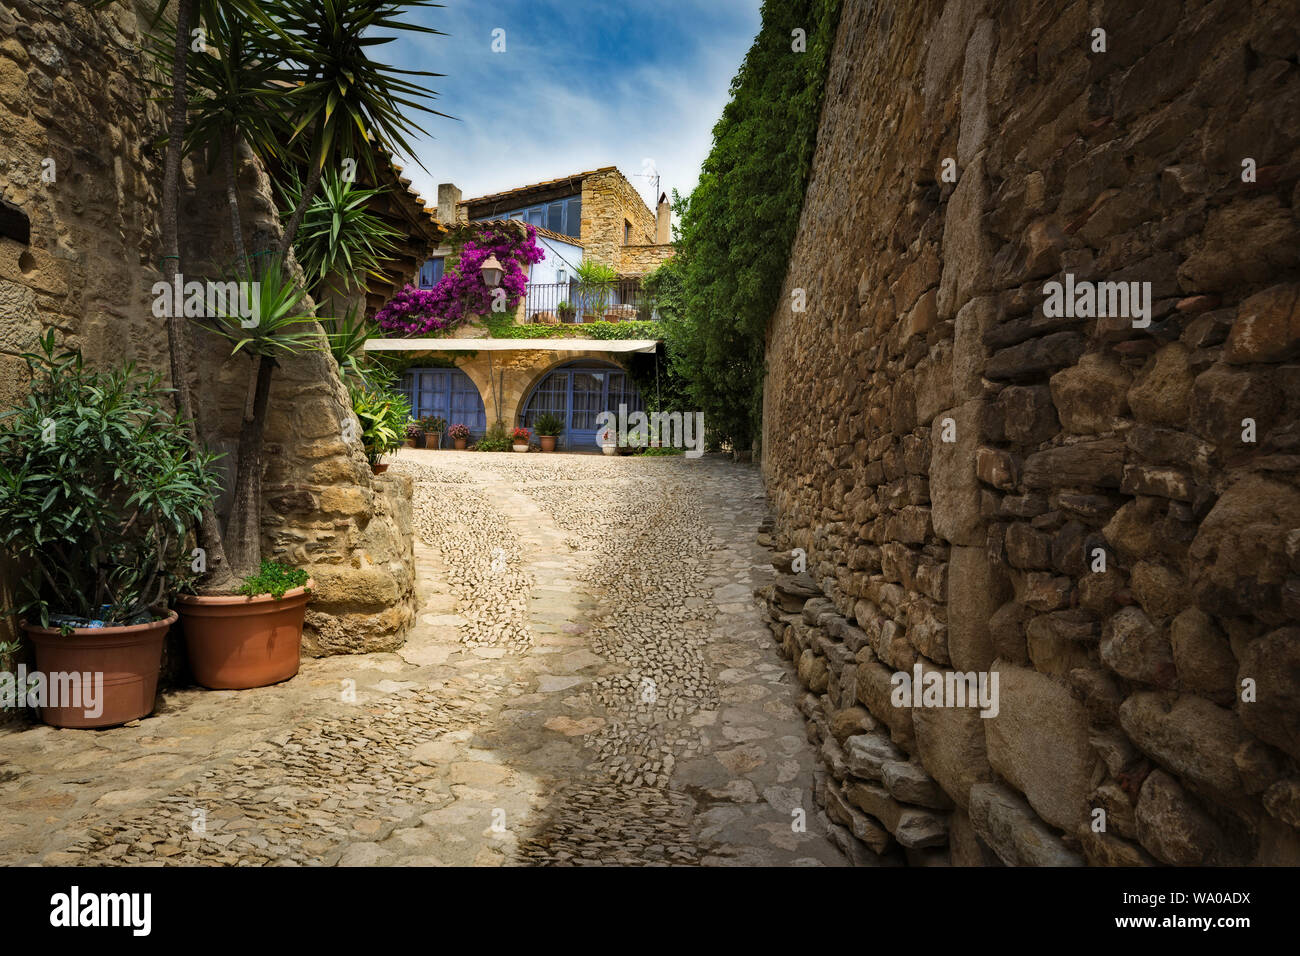 The bright purple Bougainvillea on the walls of a typical Peratallada house contrasting with the blue paintwork and soft red stone work Stock Photo